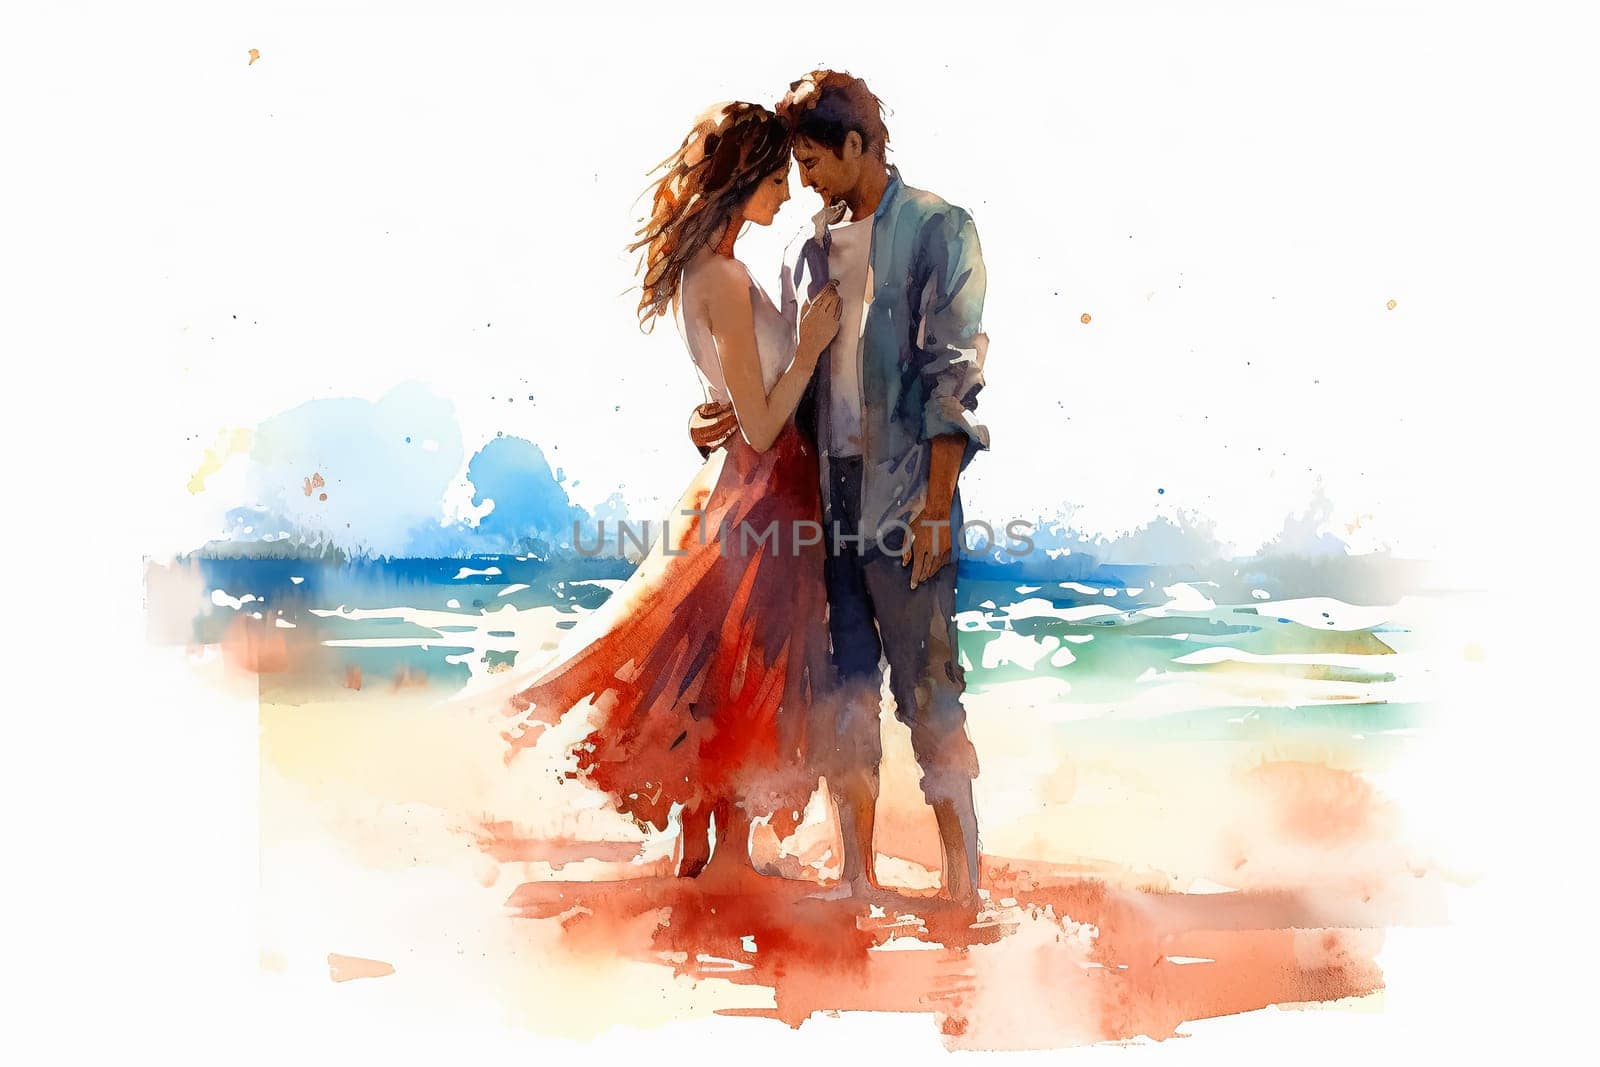 Escape to a dreamy beach setting with a watercolor illustration portraying a couple in love against the backdrop of the ocean. A romantic and serene date.